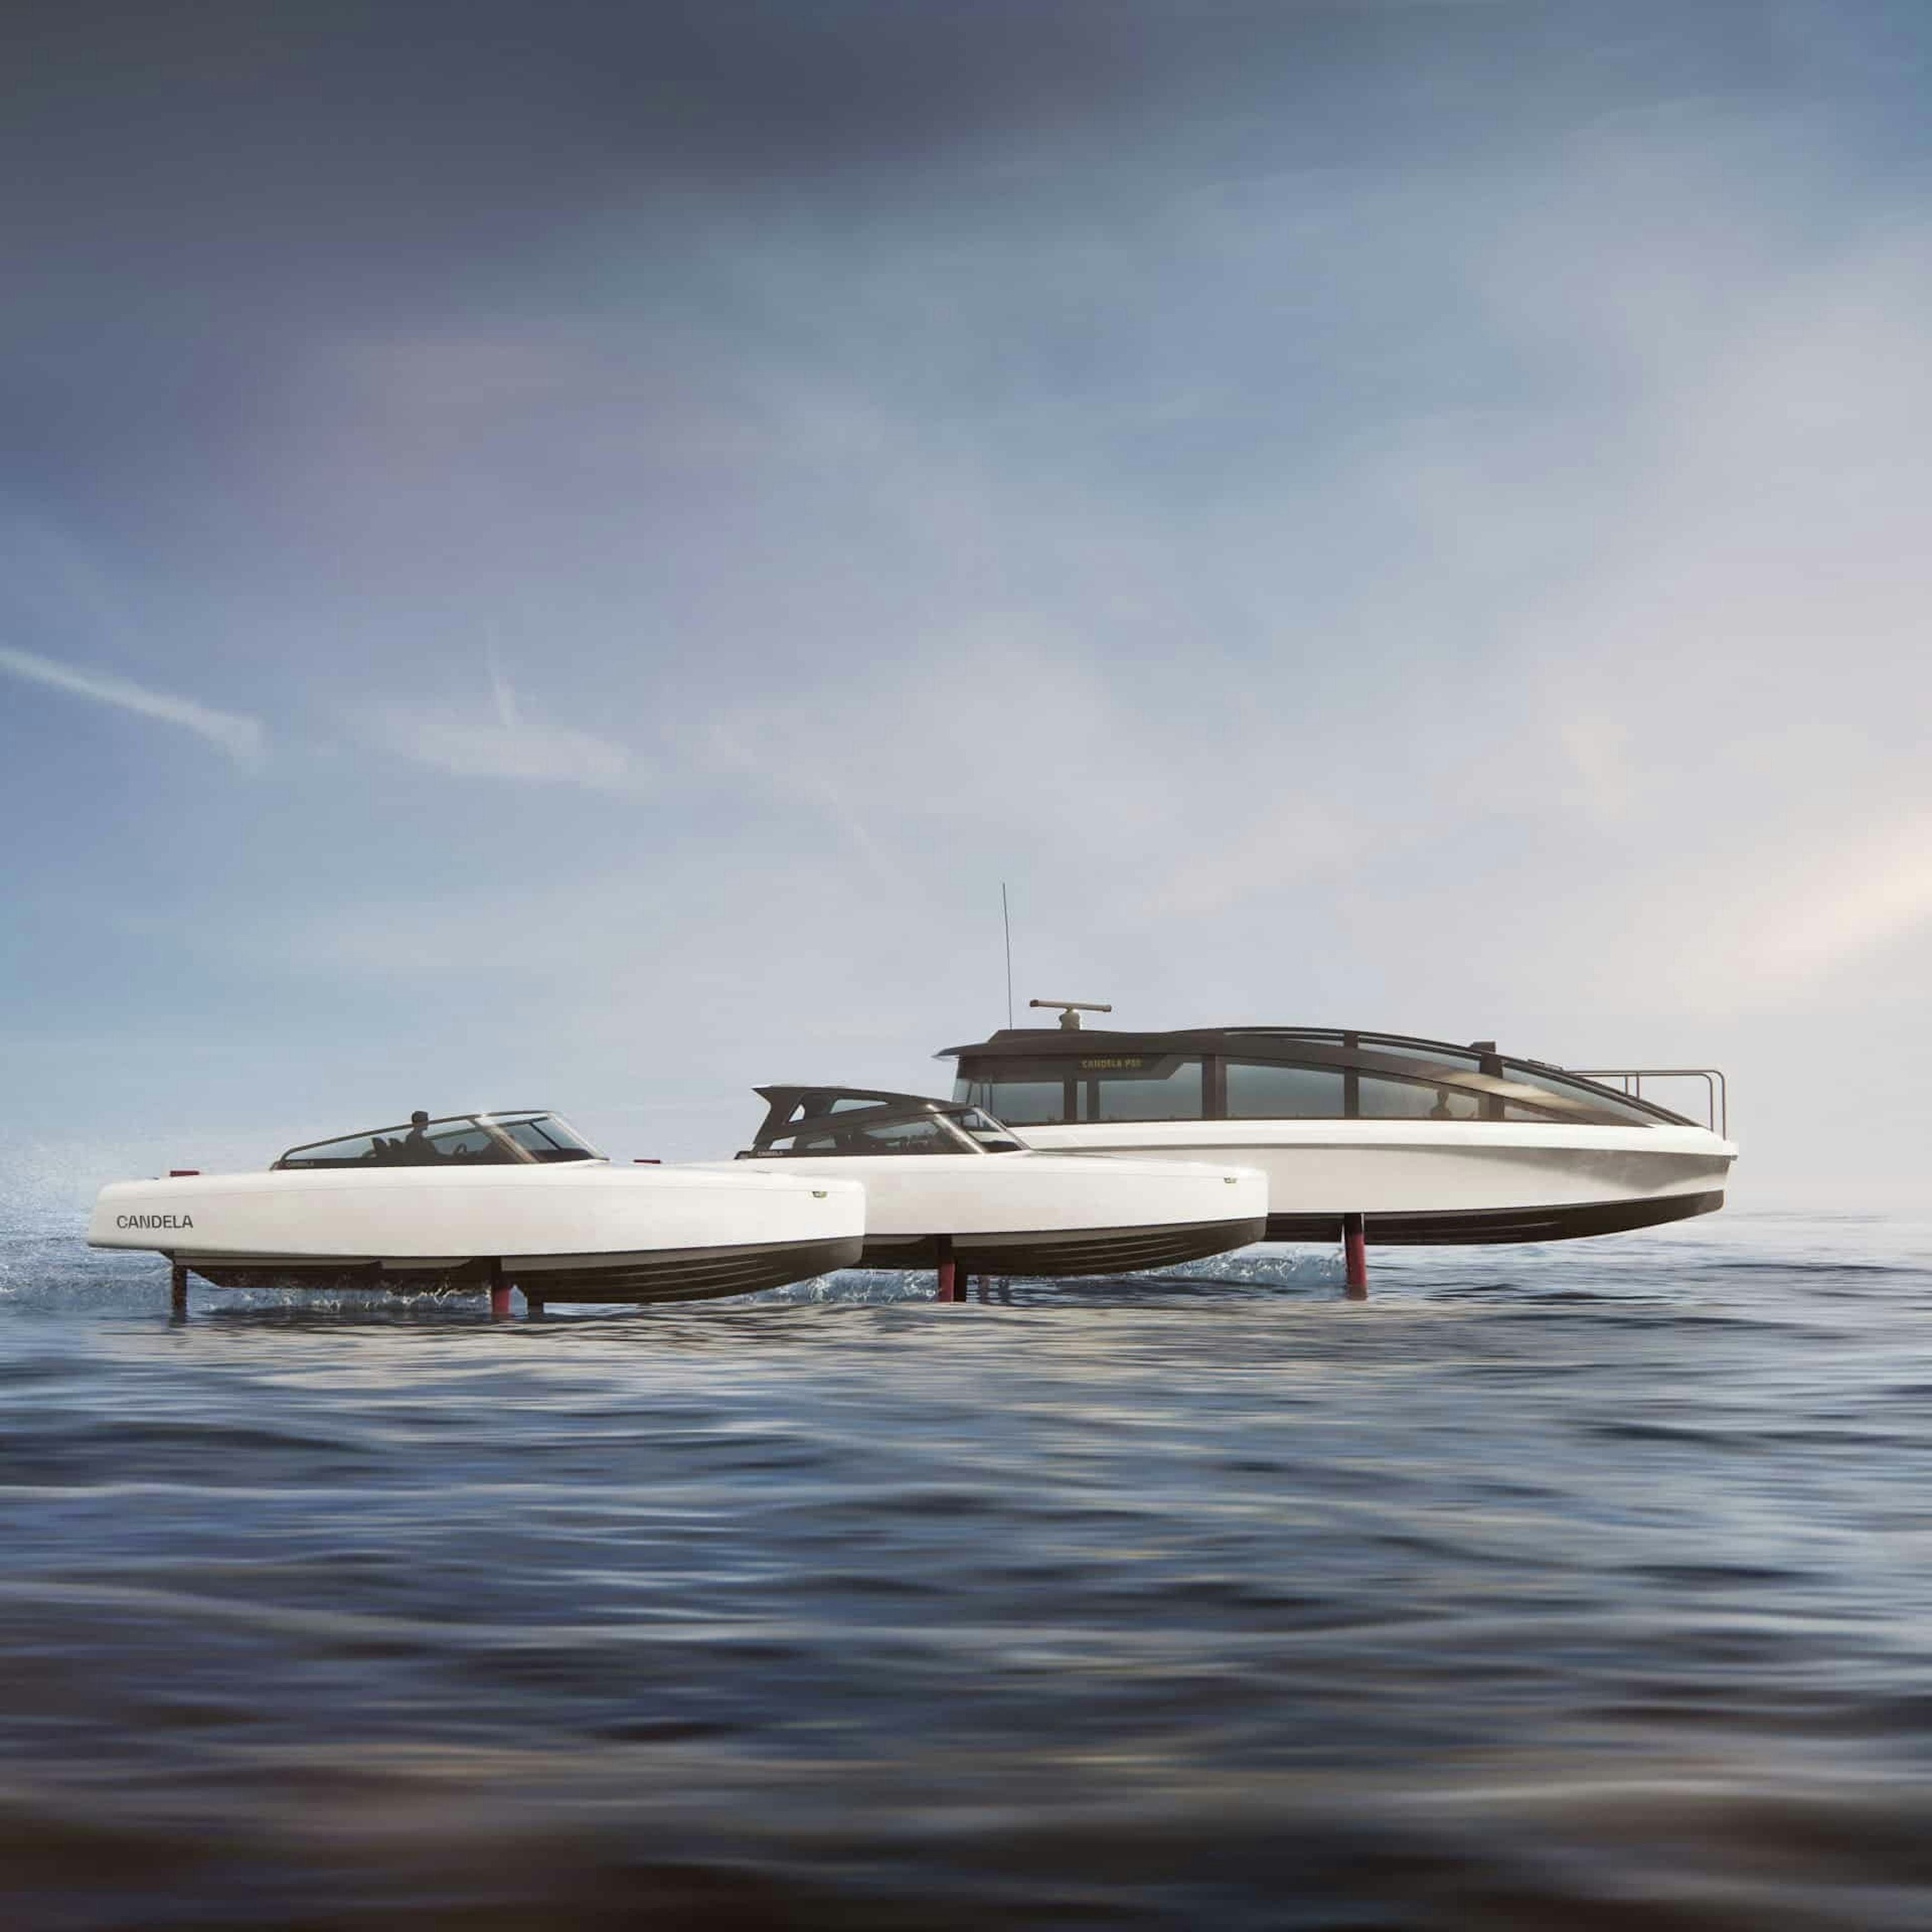 Candela is the biggest producer of electric powerboats